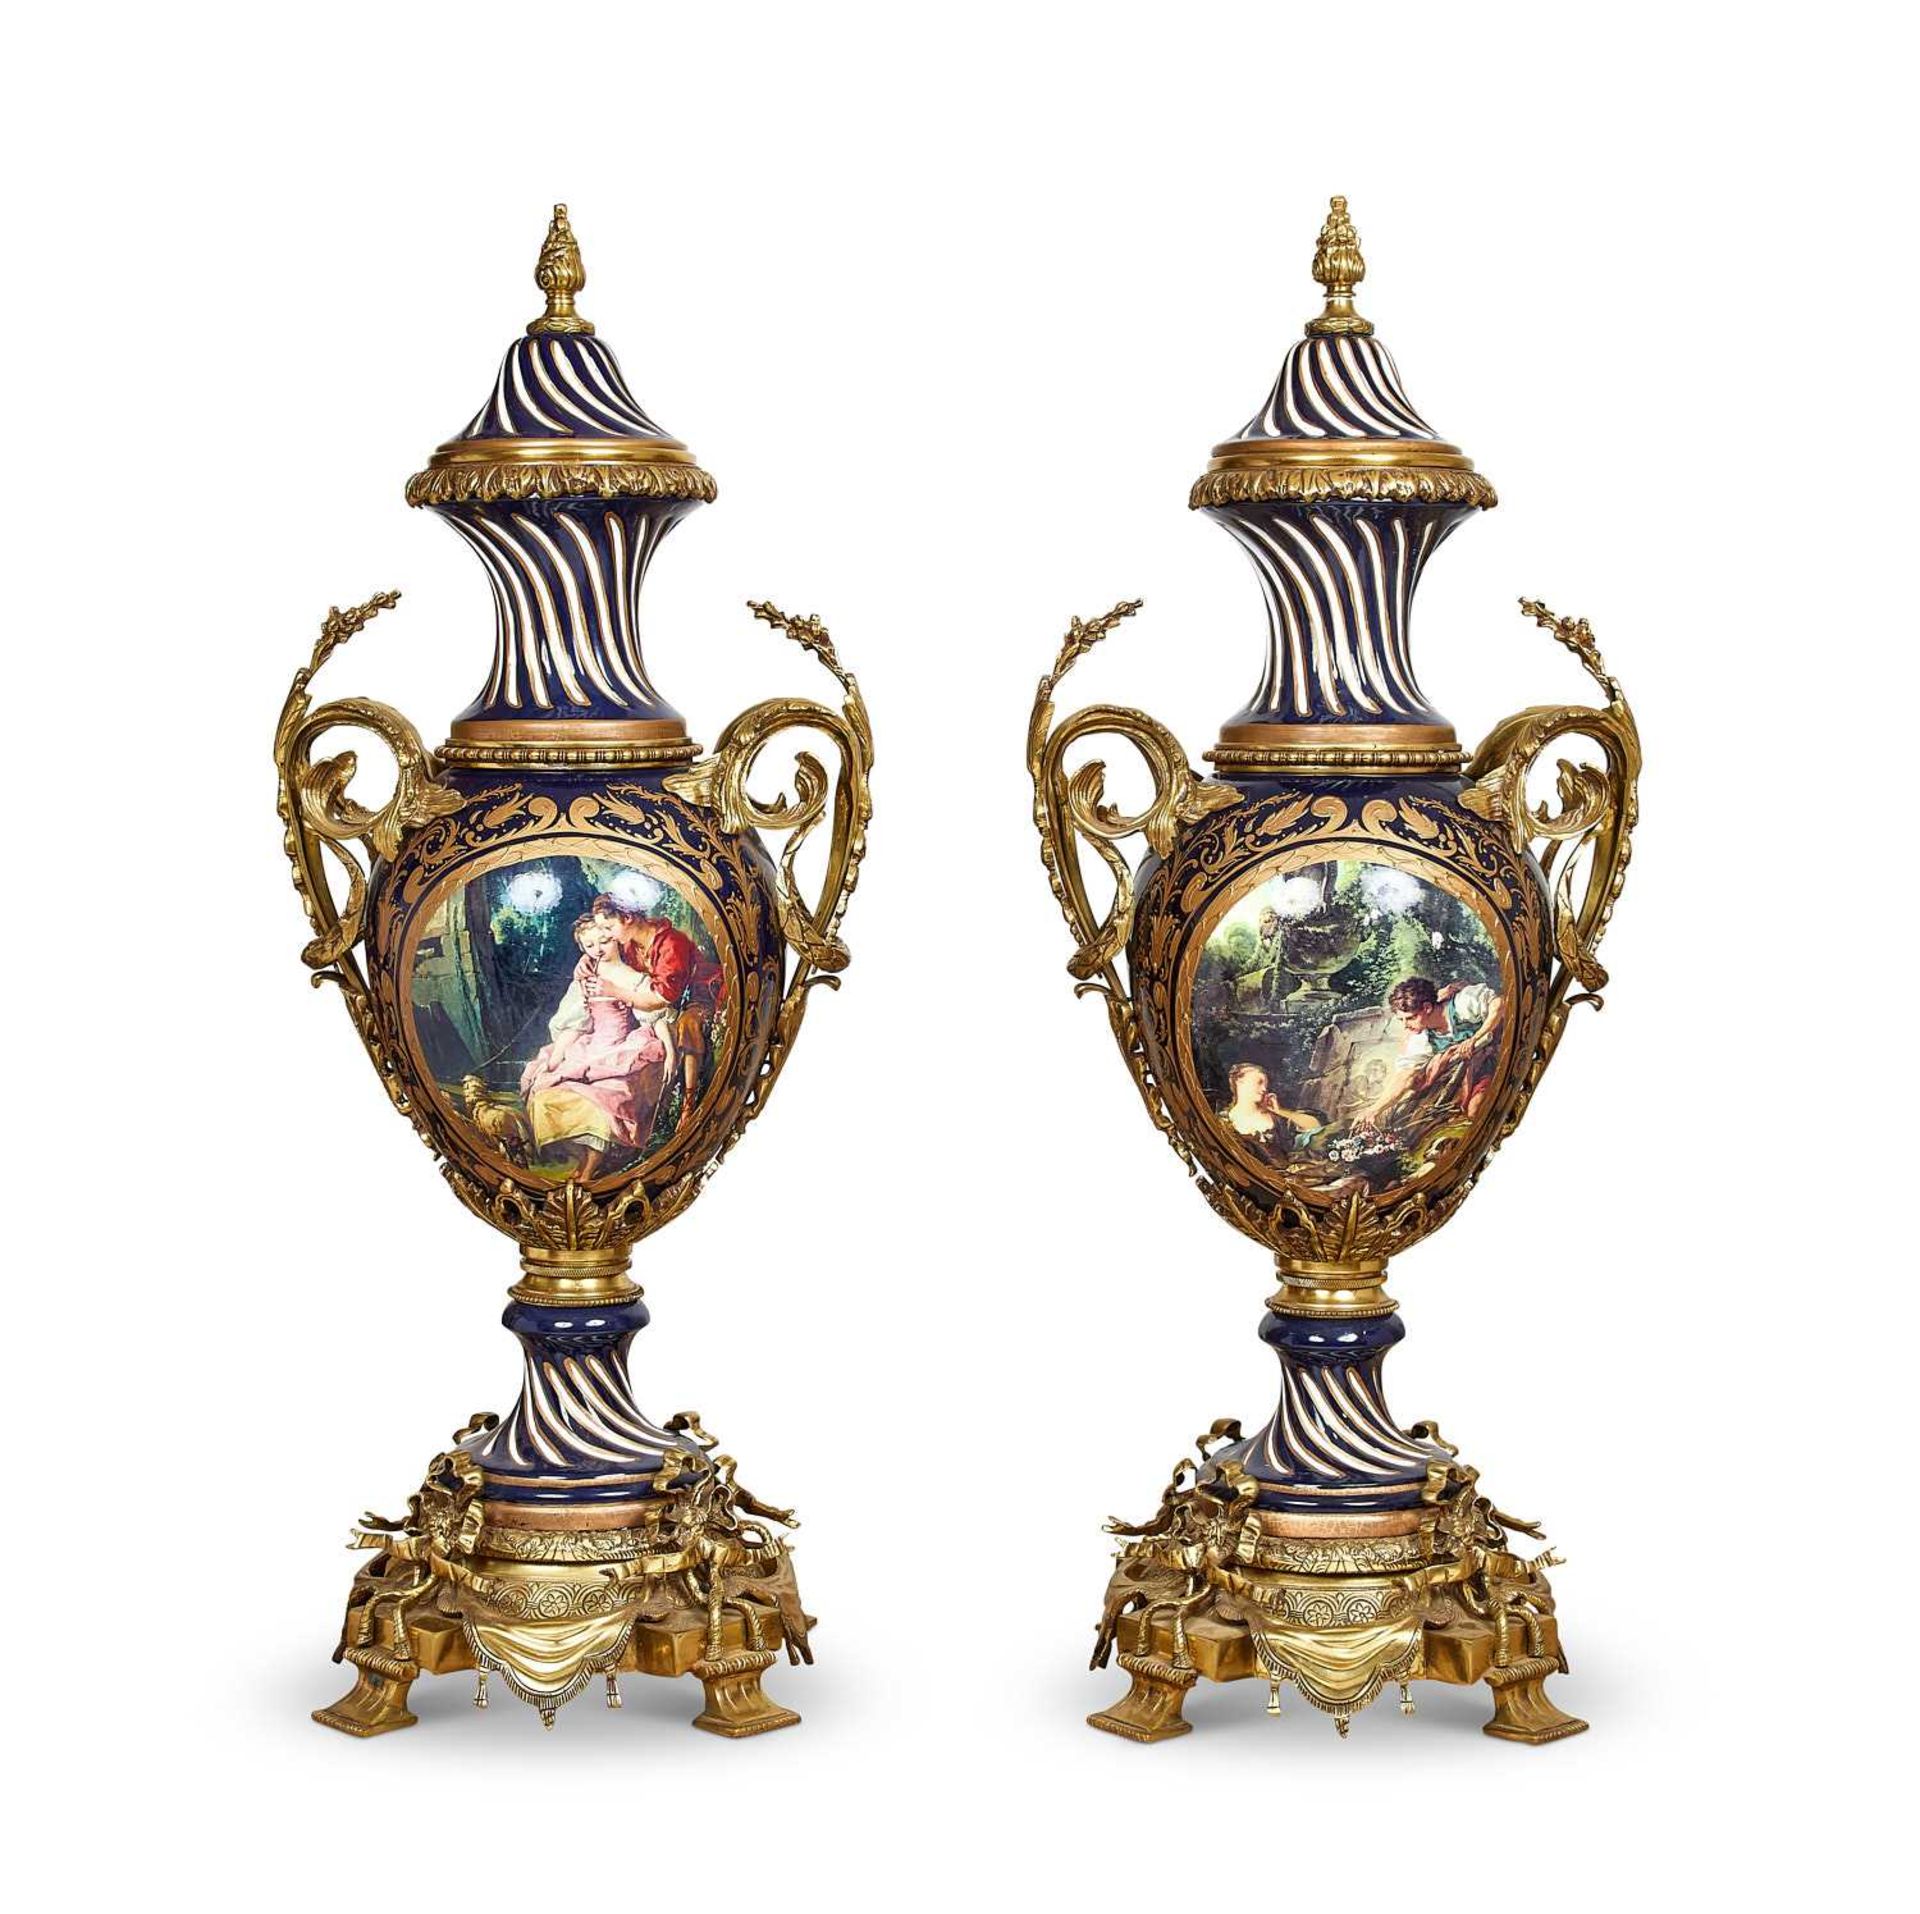 A VERY LARGE PAIR OF LOUIS XVI STYLE PORCELAIN AND GILT BRONZE VASES AND COVERS